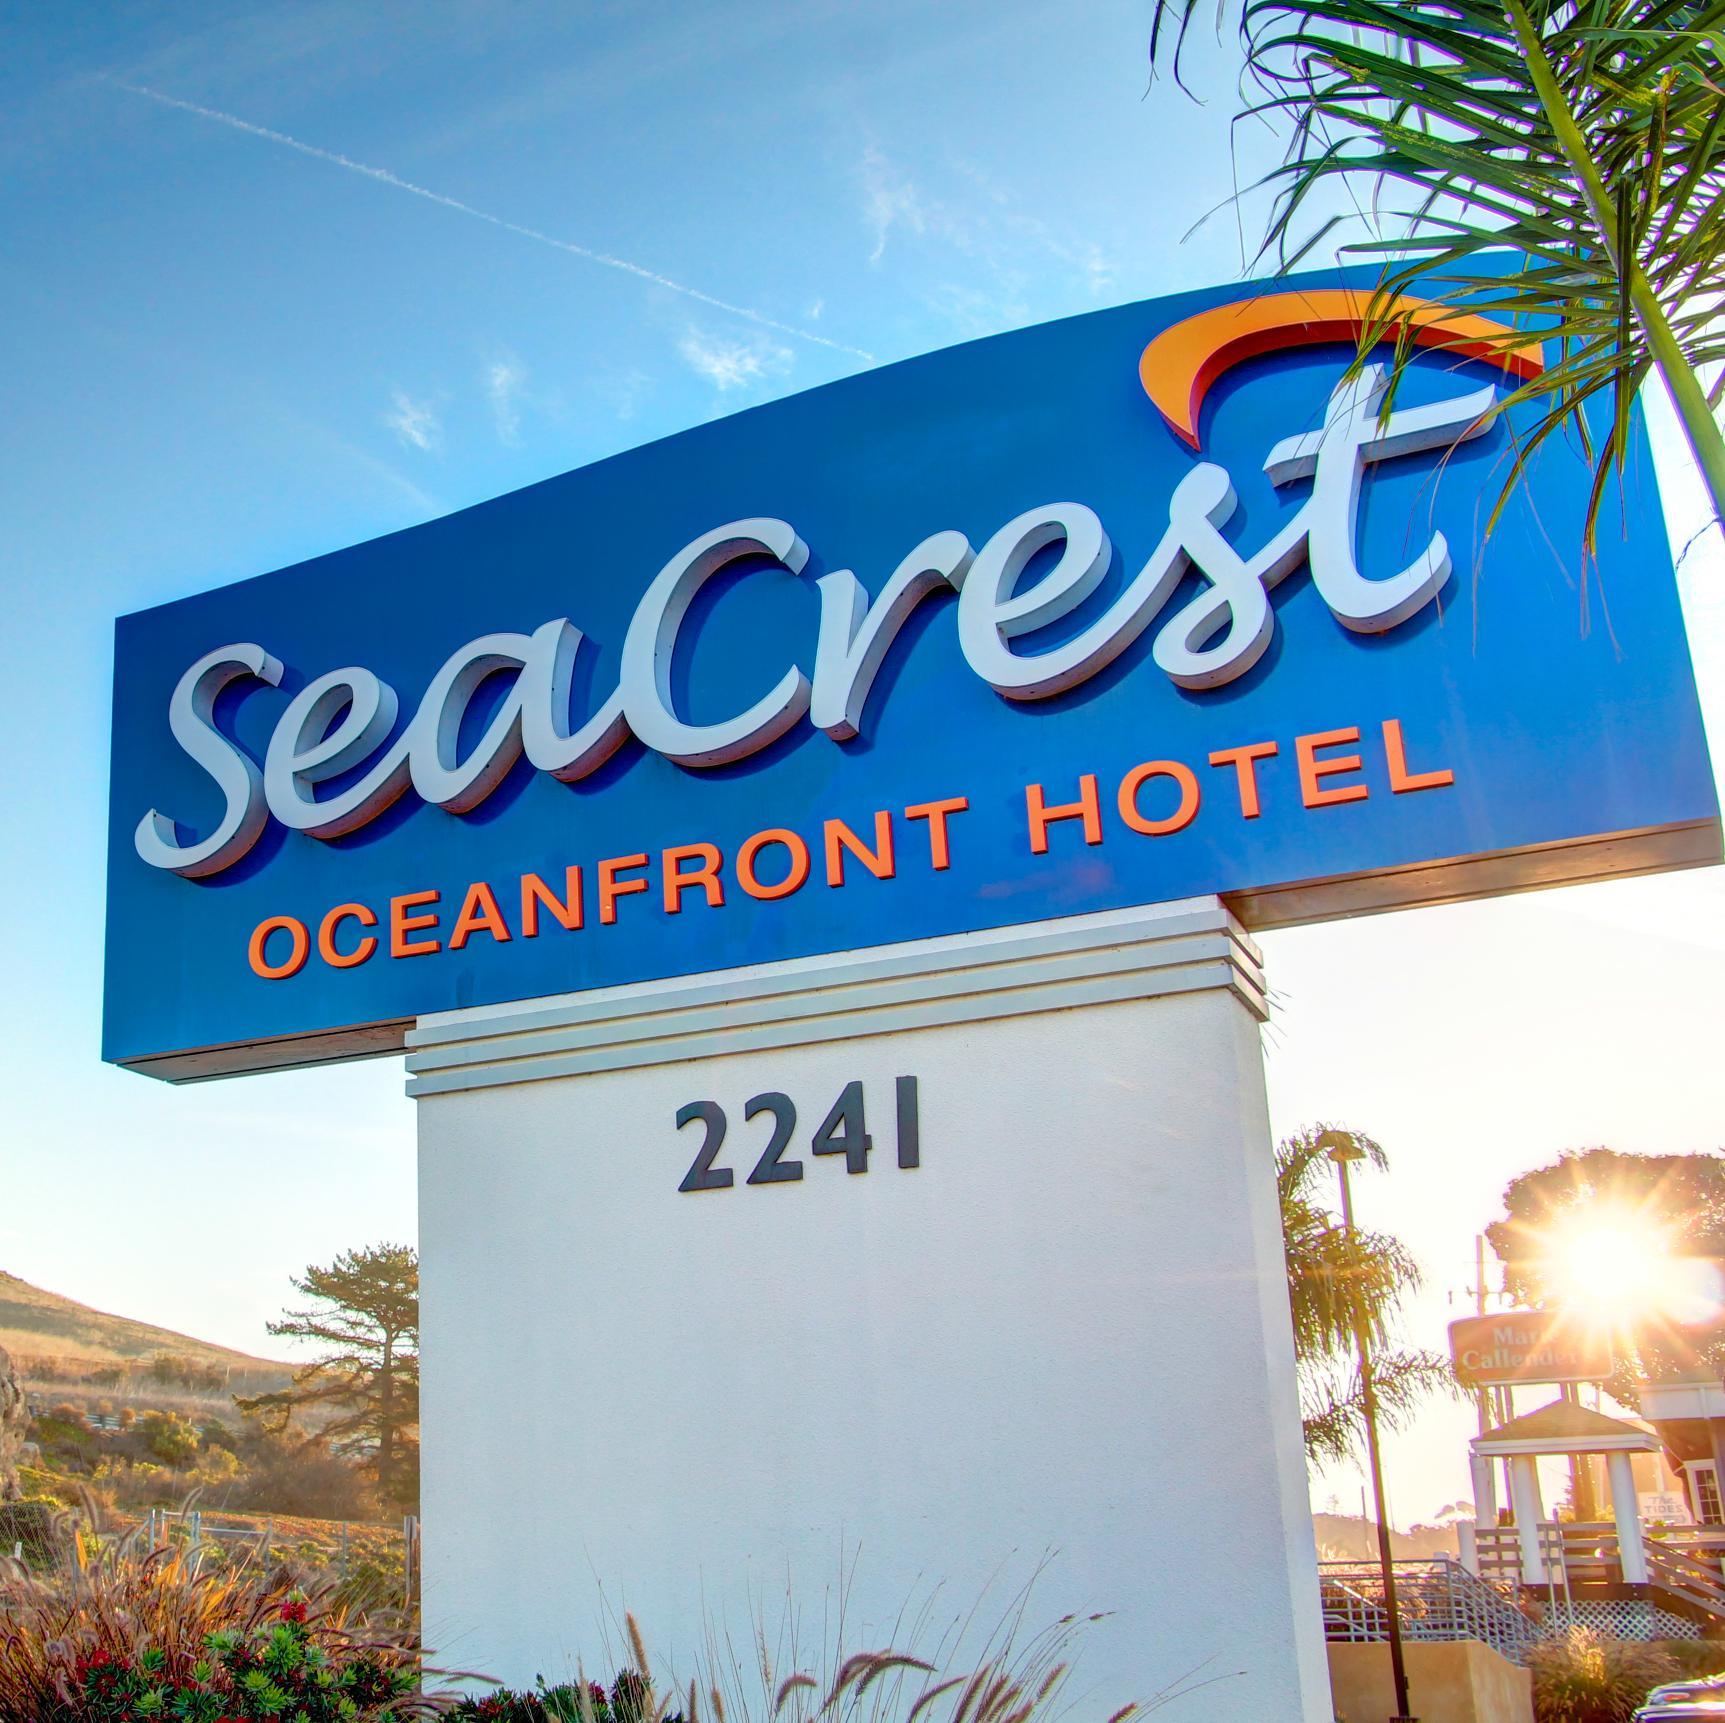 Coolest oceanfront hotel in Pismo Beach and San Luis Obispo, CA, 158 retro-chic rooms and suites, direct beach access, outdoor heated pool on 5 acre-bluff top